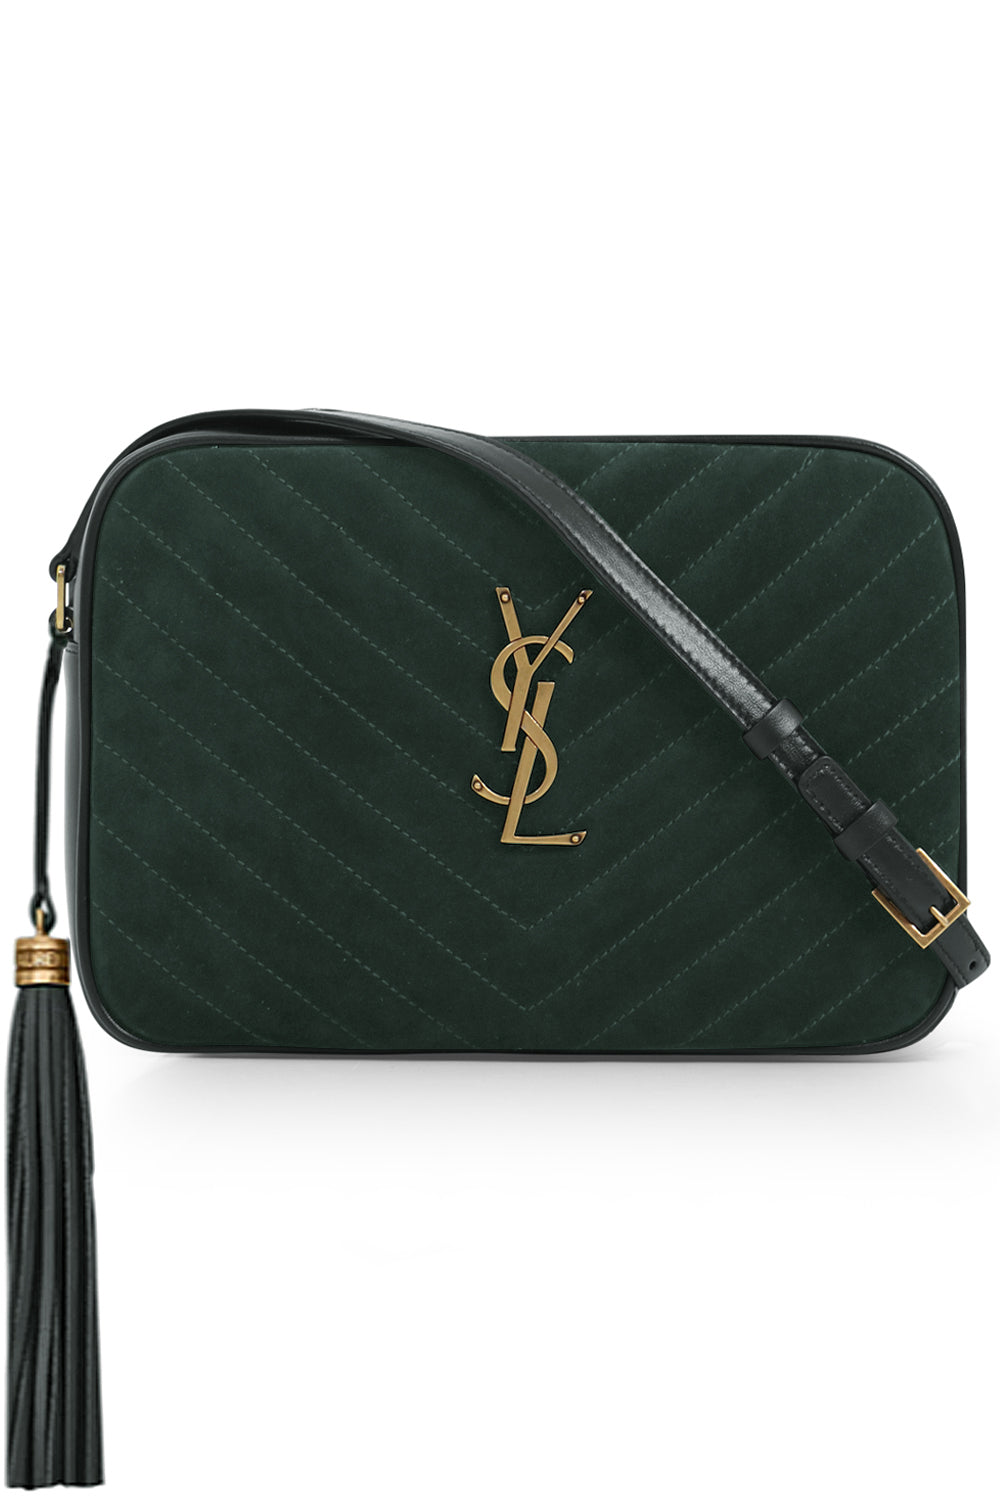 SAINT LAURENT LOU QUILTED CAMERA BAG SUEDE NEW VERT FONCE/GOLD